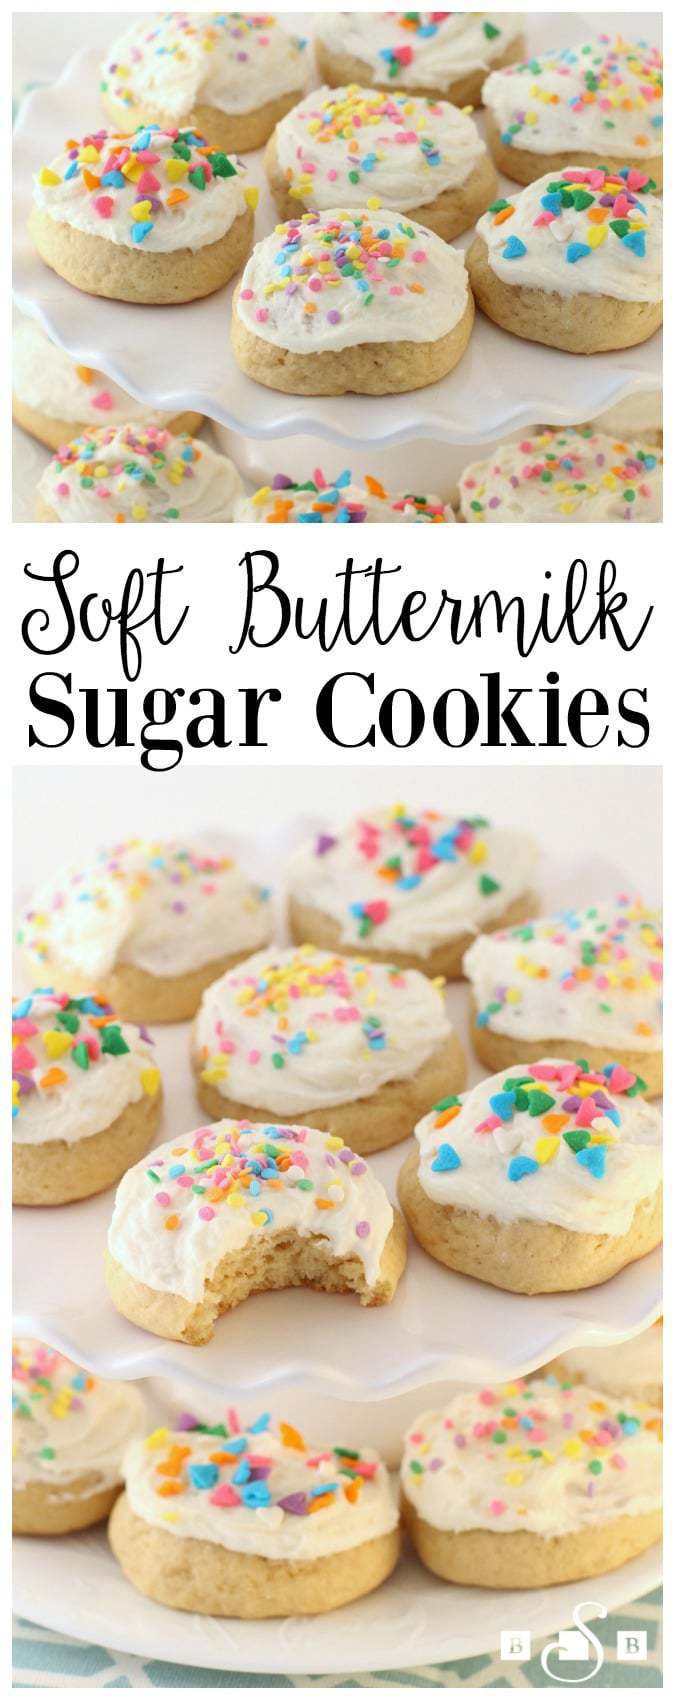 Buttermilk Sugar Cookies are every sugar cookie lovers' dream come true! This sugar cookie with buttermilk creates the most soft and delicious treat and they are so easy to make too! 